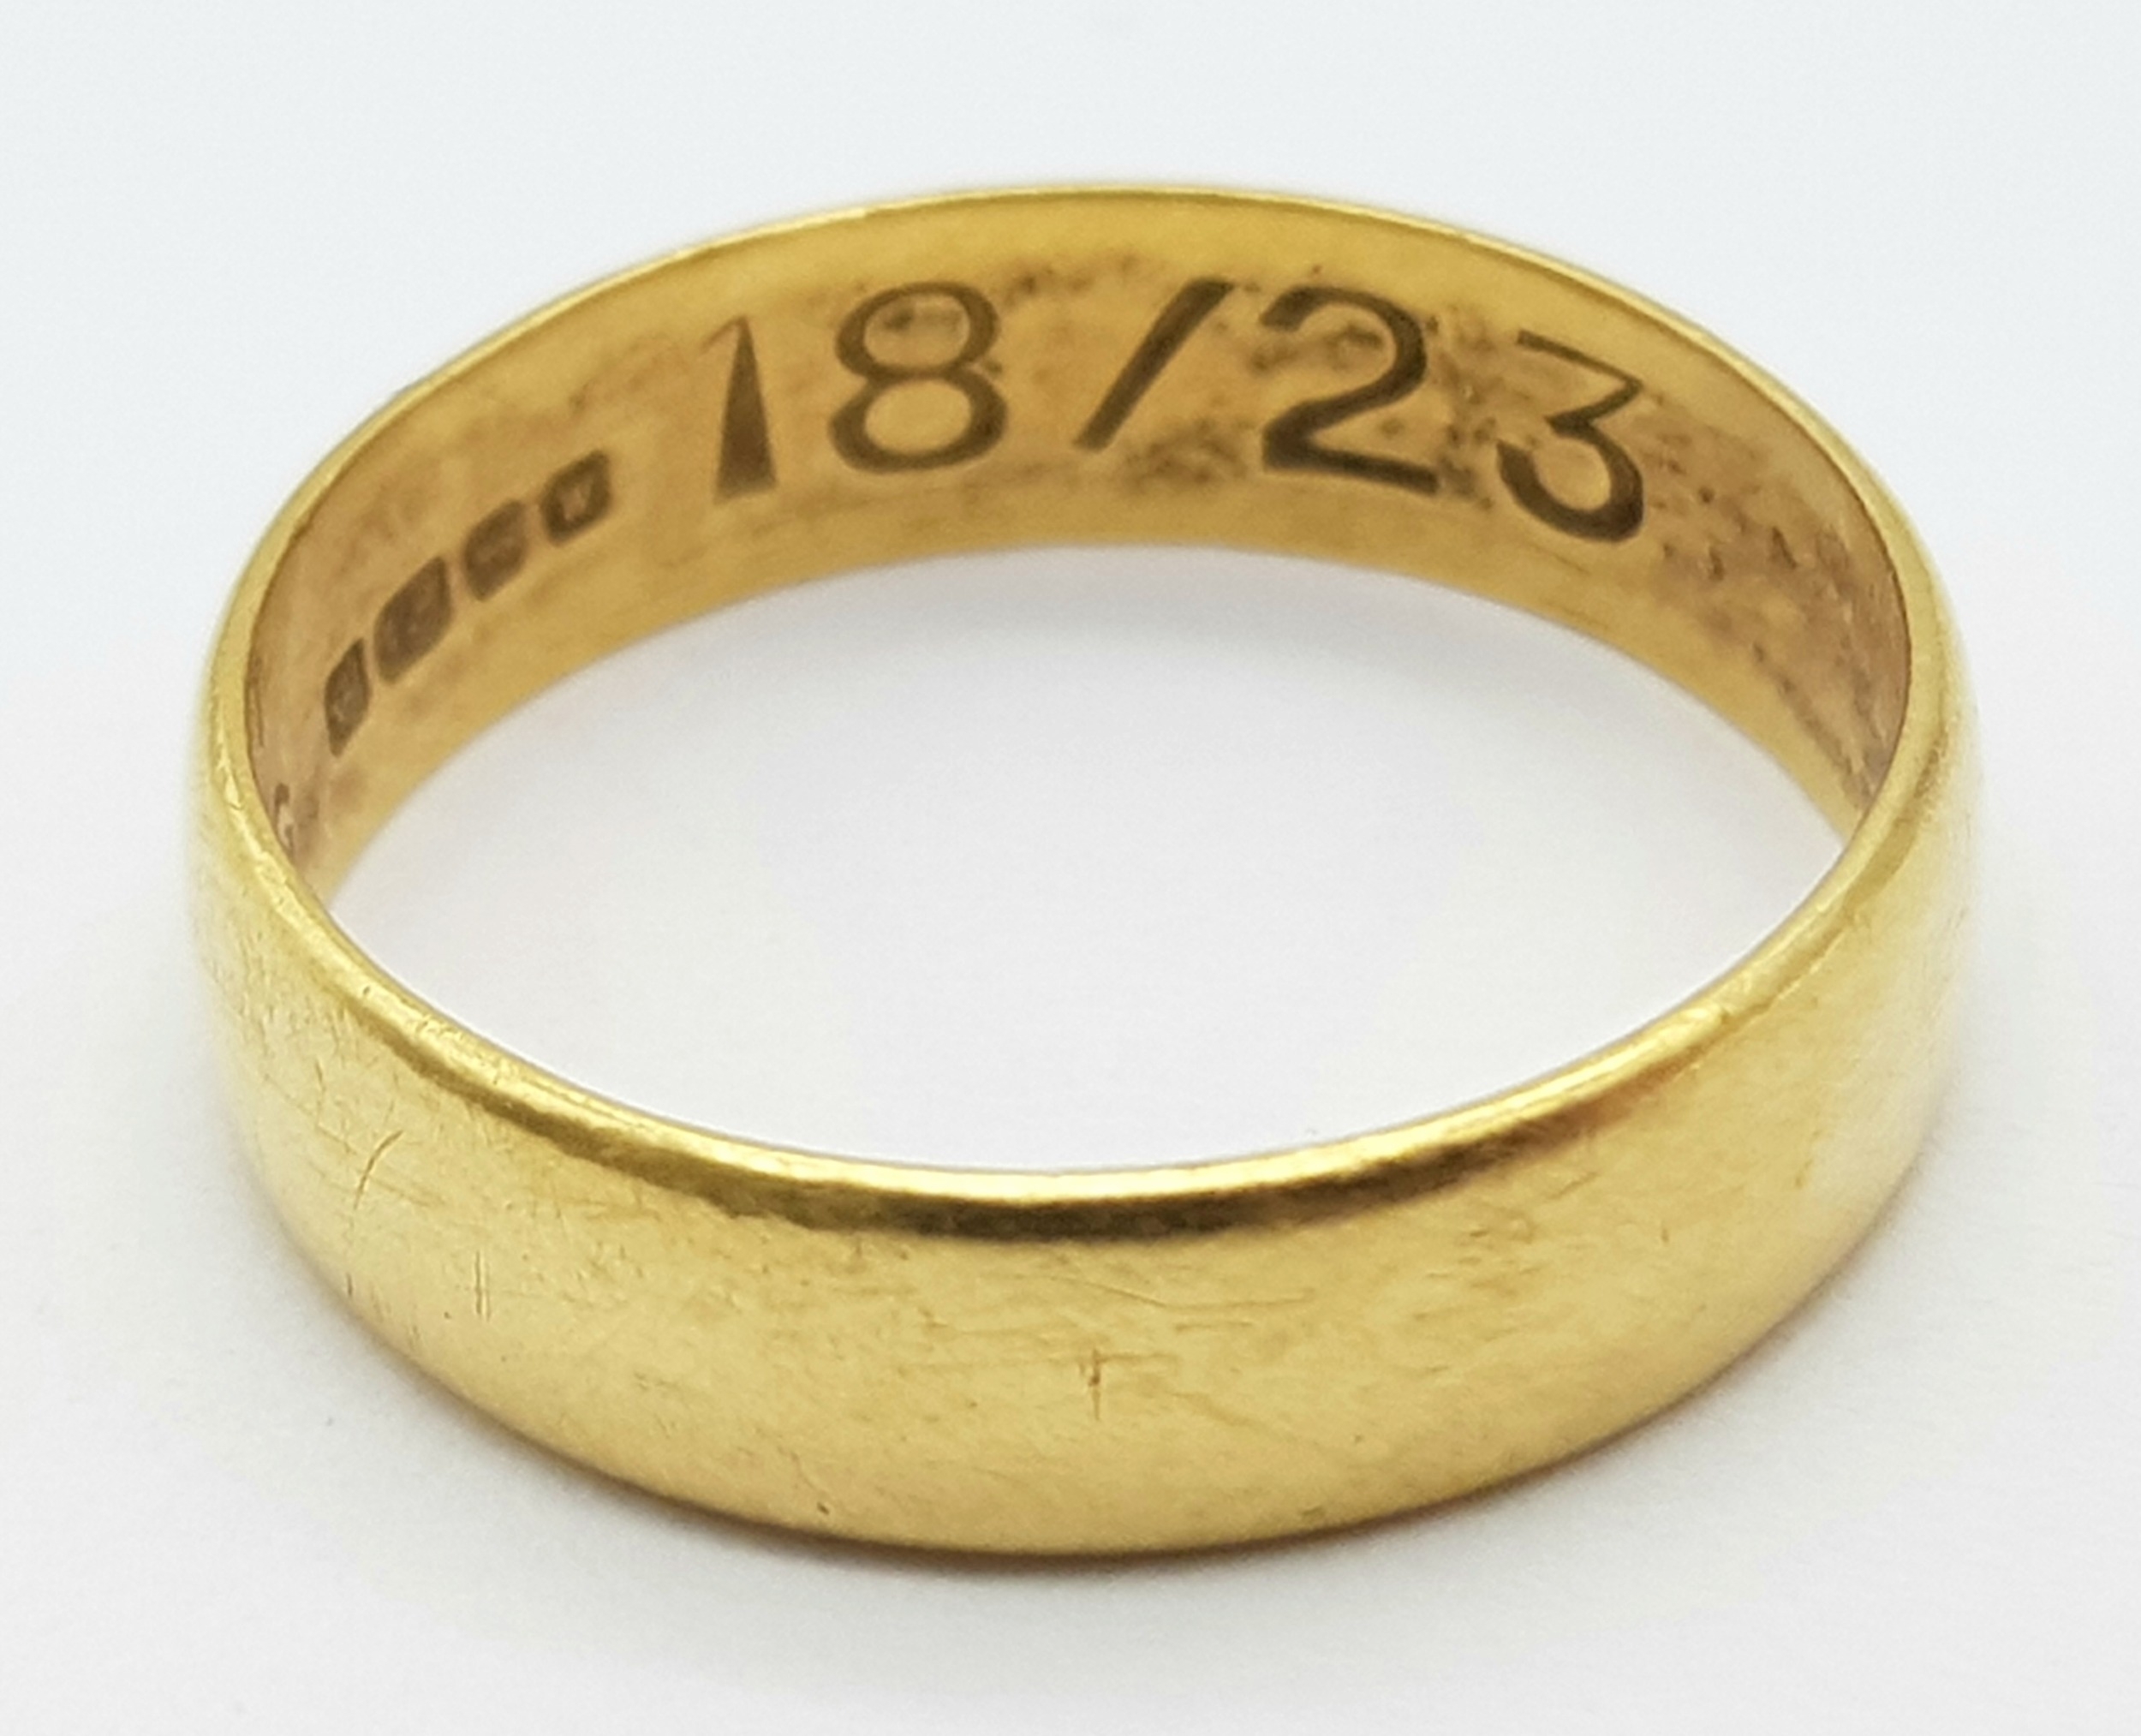 A Vintage 18K Yellow Gold Band Ring. 5mm width. Size O. 3.51g weight. Full UK hallmarks. - Image 2 of 4